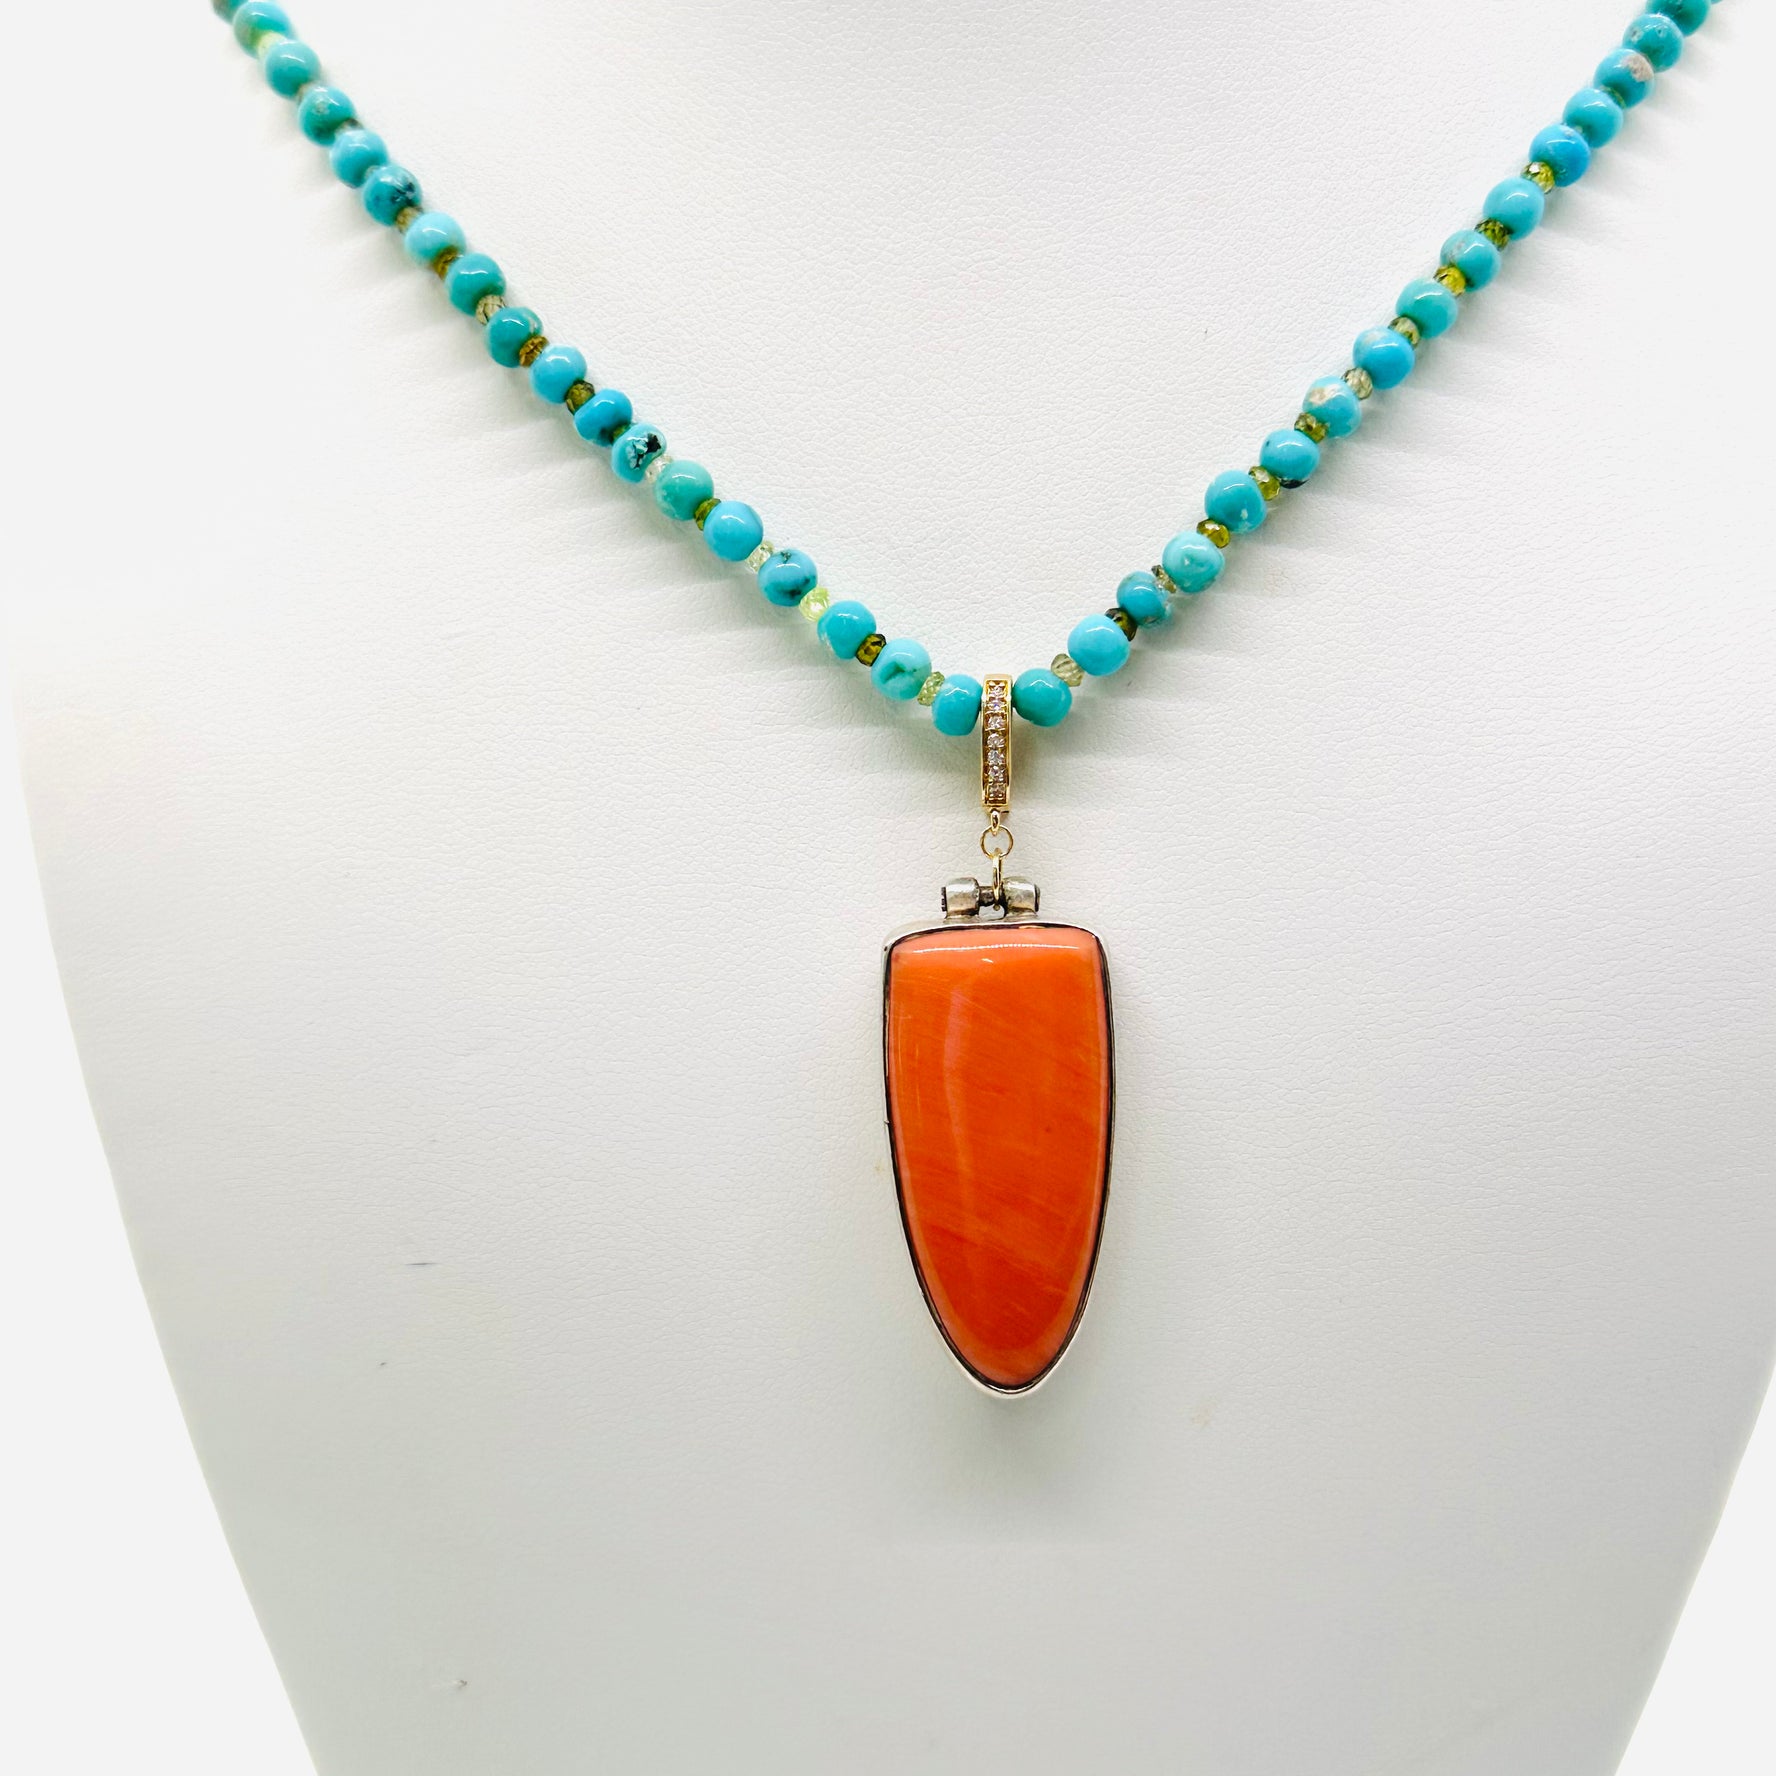 turquoise bead necklace